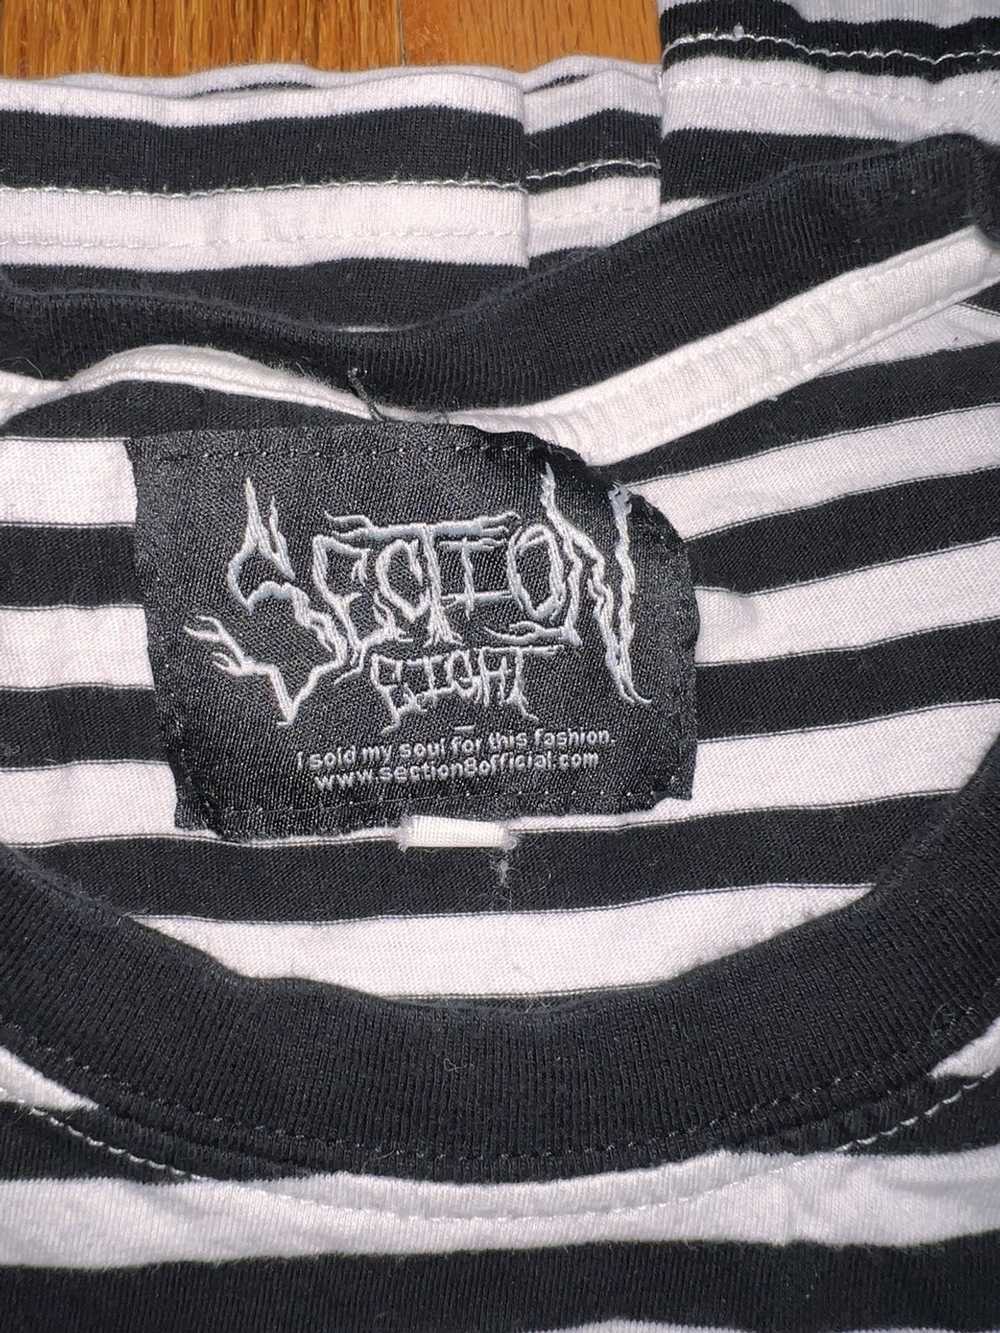 Section 8 SECTION 8 SKULL STRIPED TSHIRT - image 3